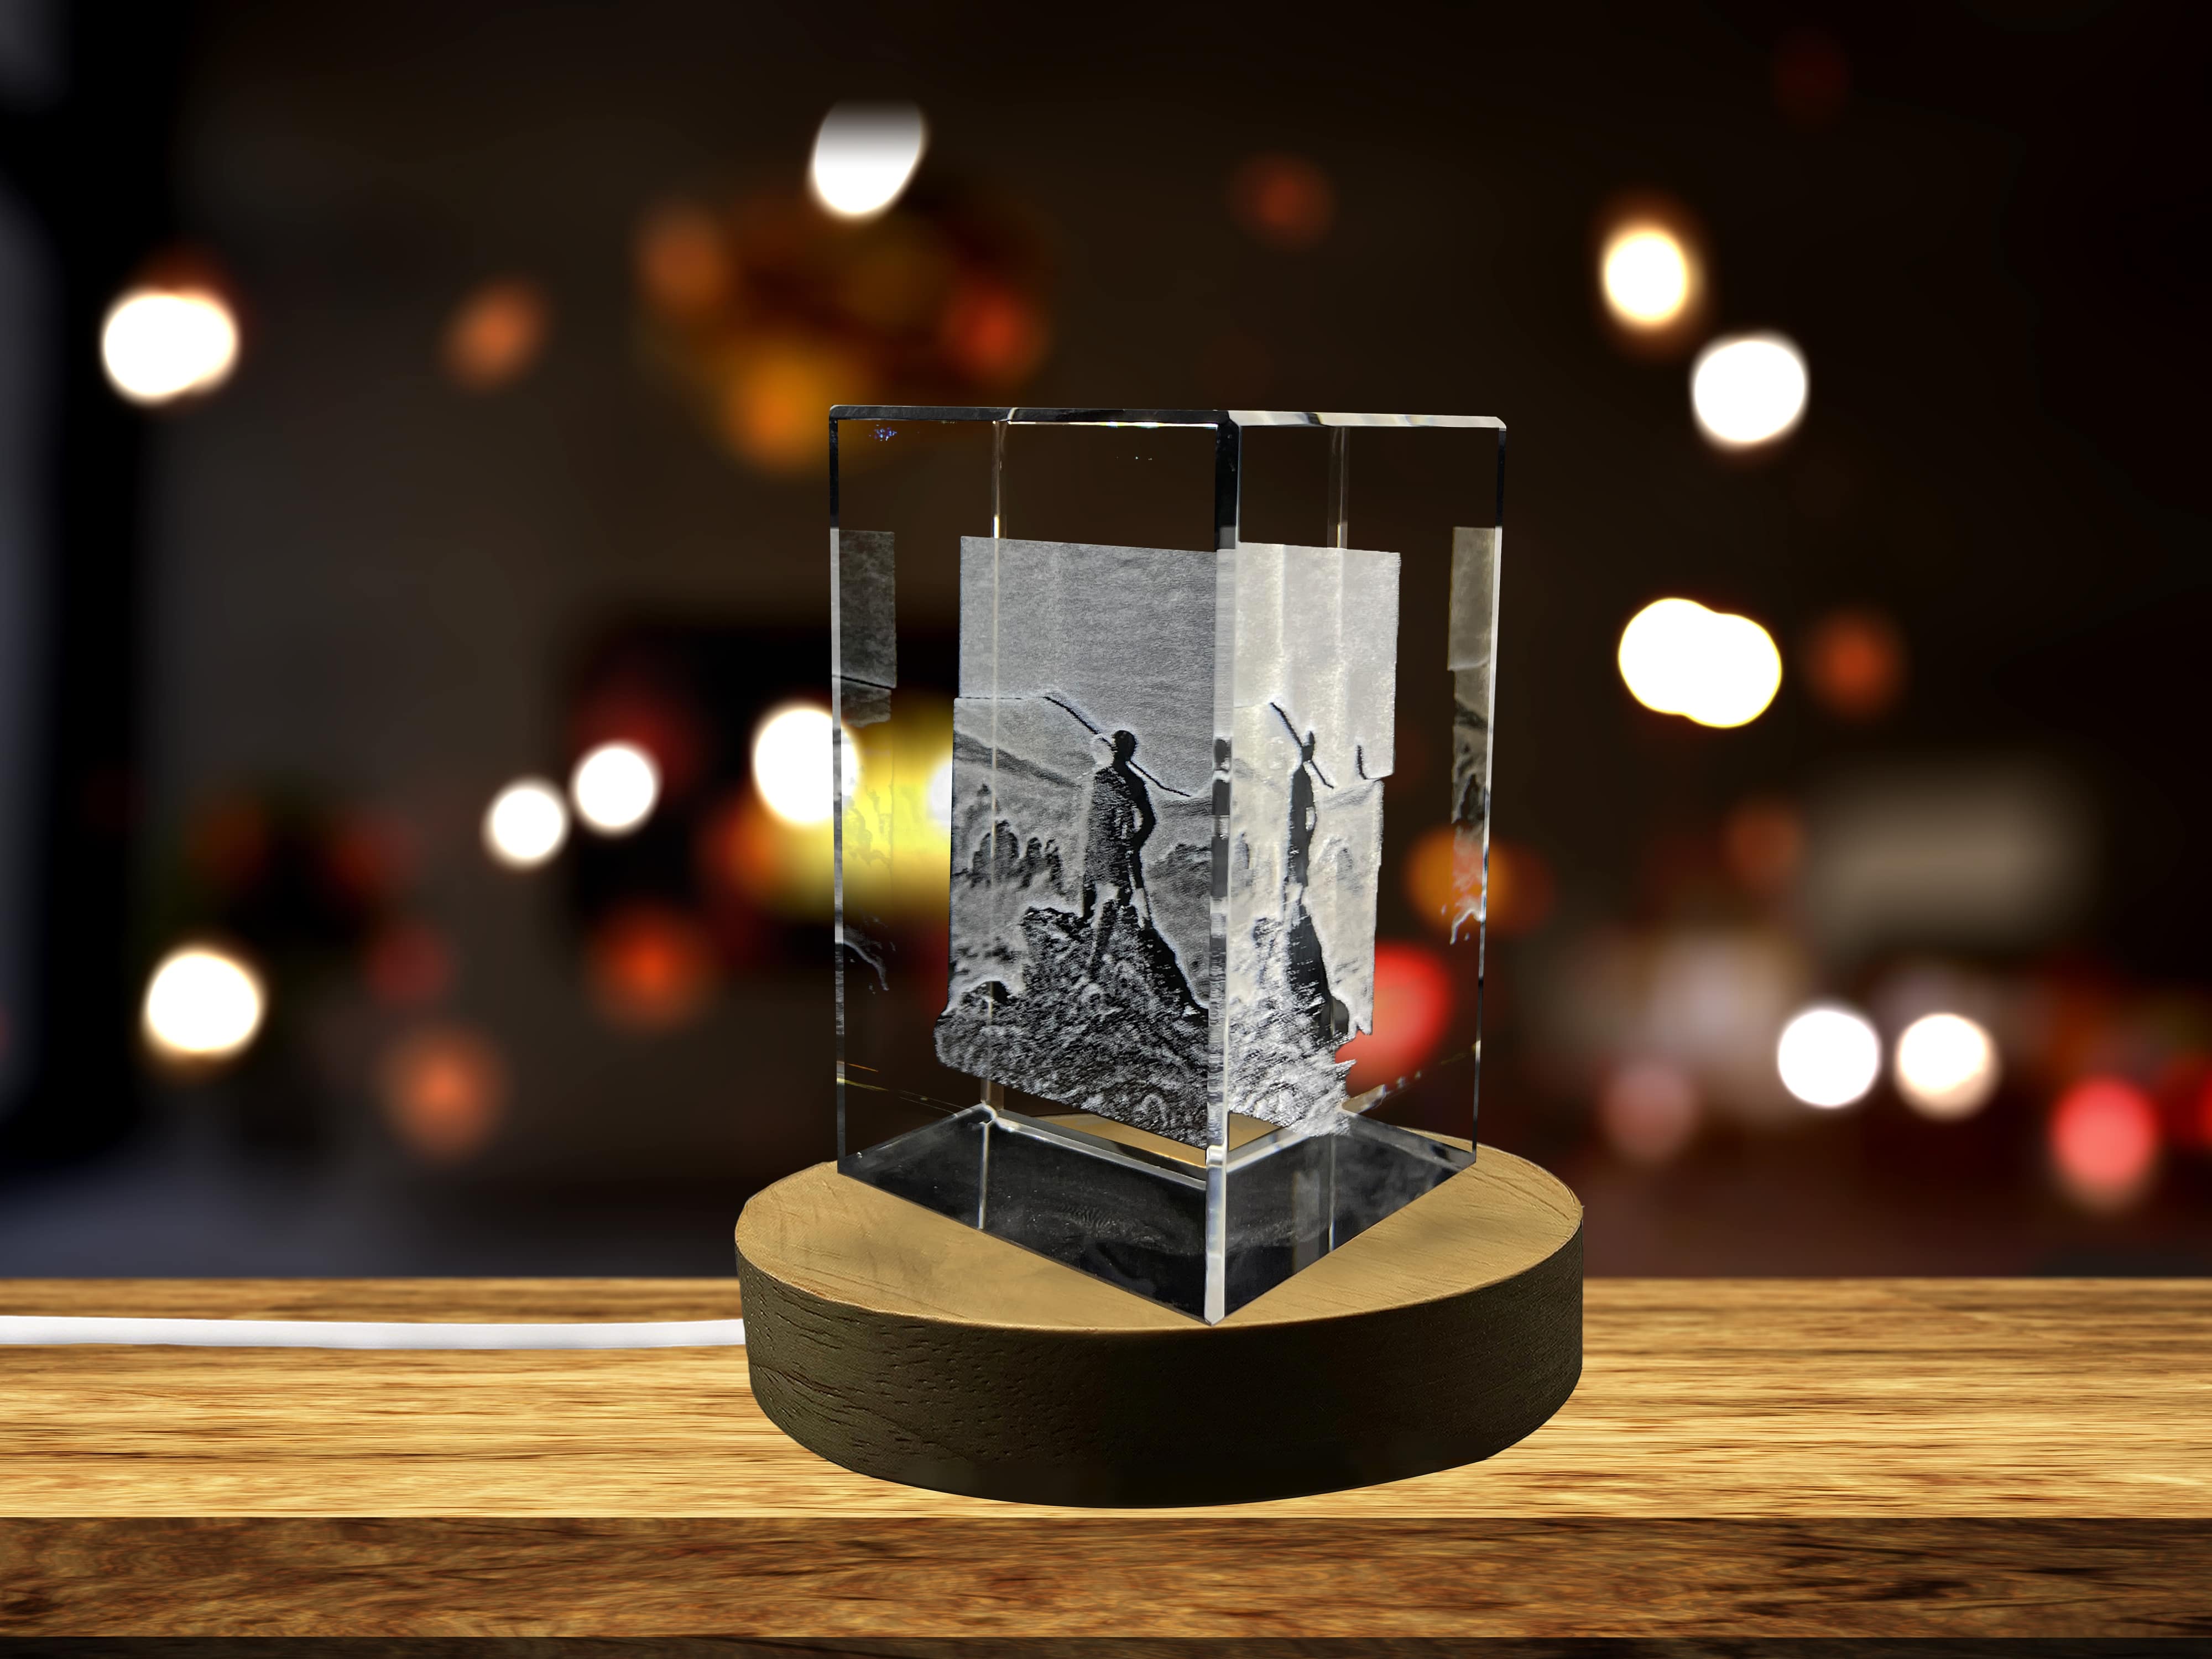 Wanderer above the Sea of Fog 3D Engraved Crystal Keepsake/Gift/Decor/Collectible/Souvenir A&B Crystal Collection